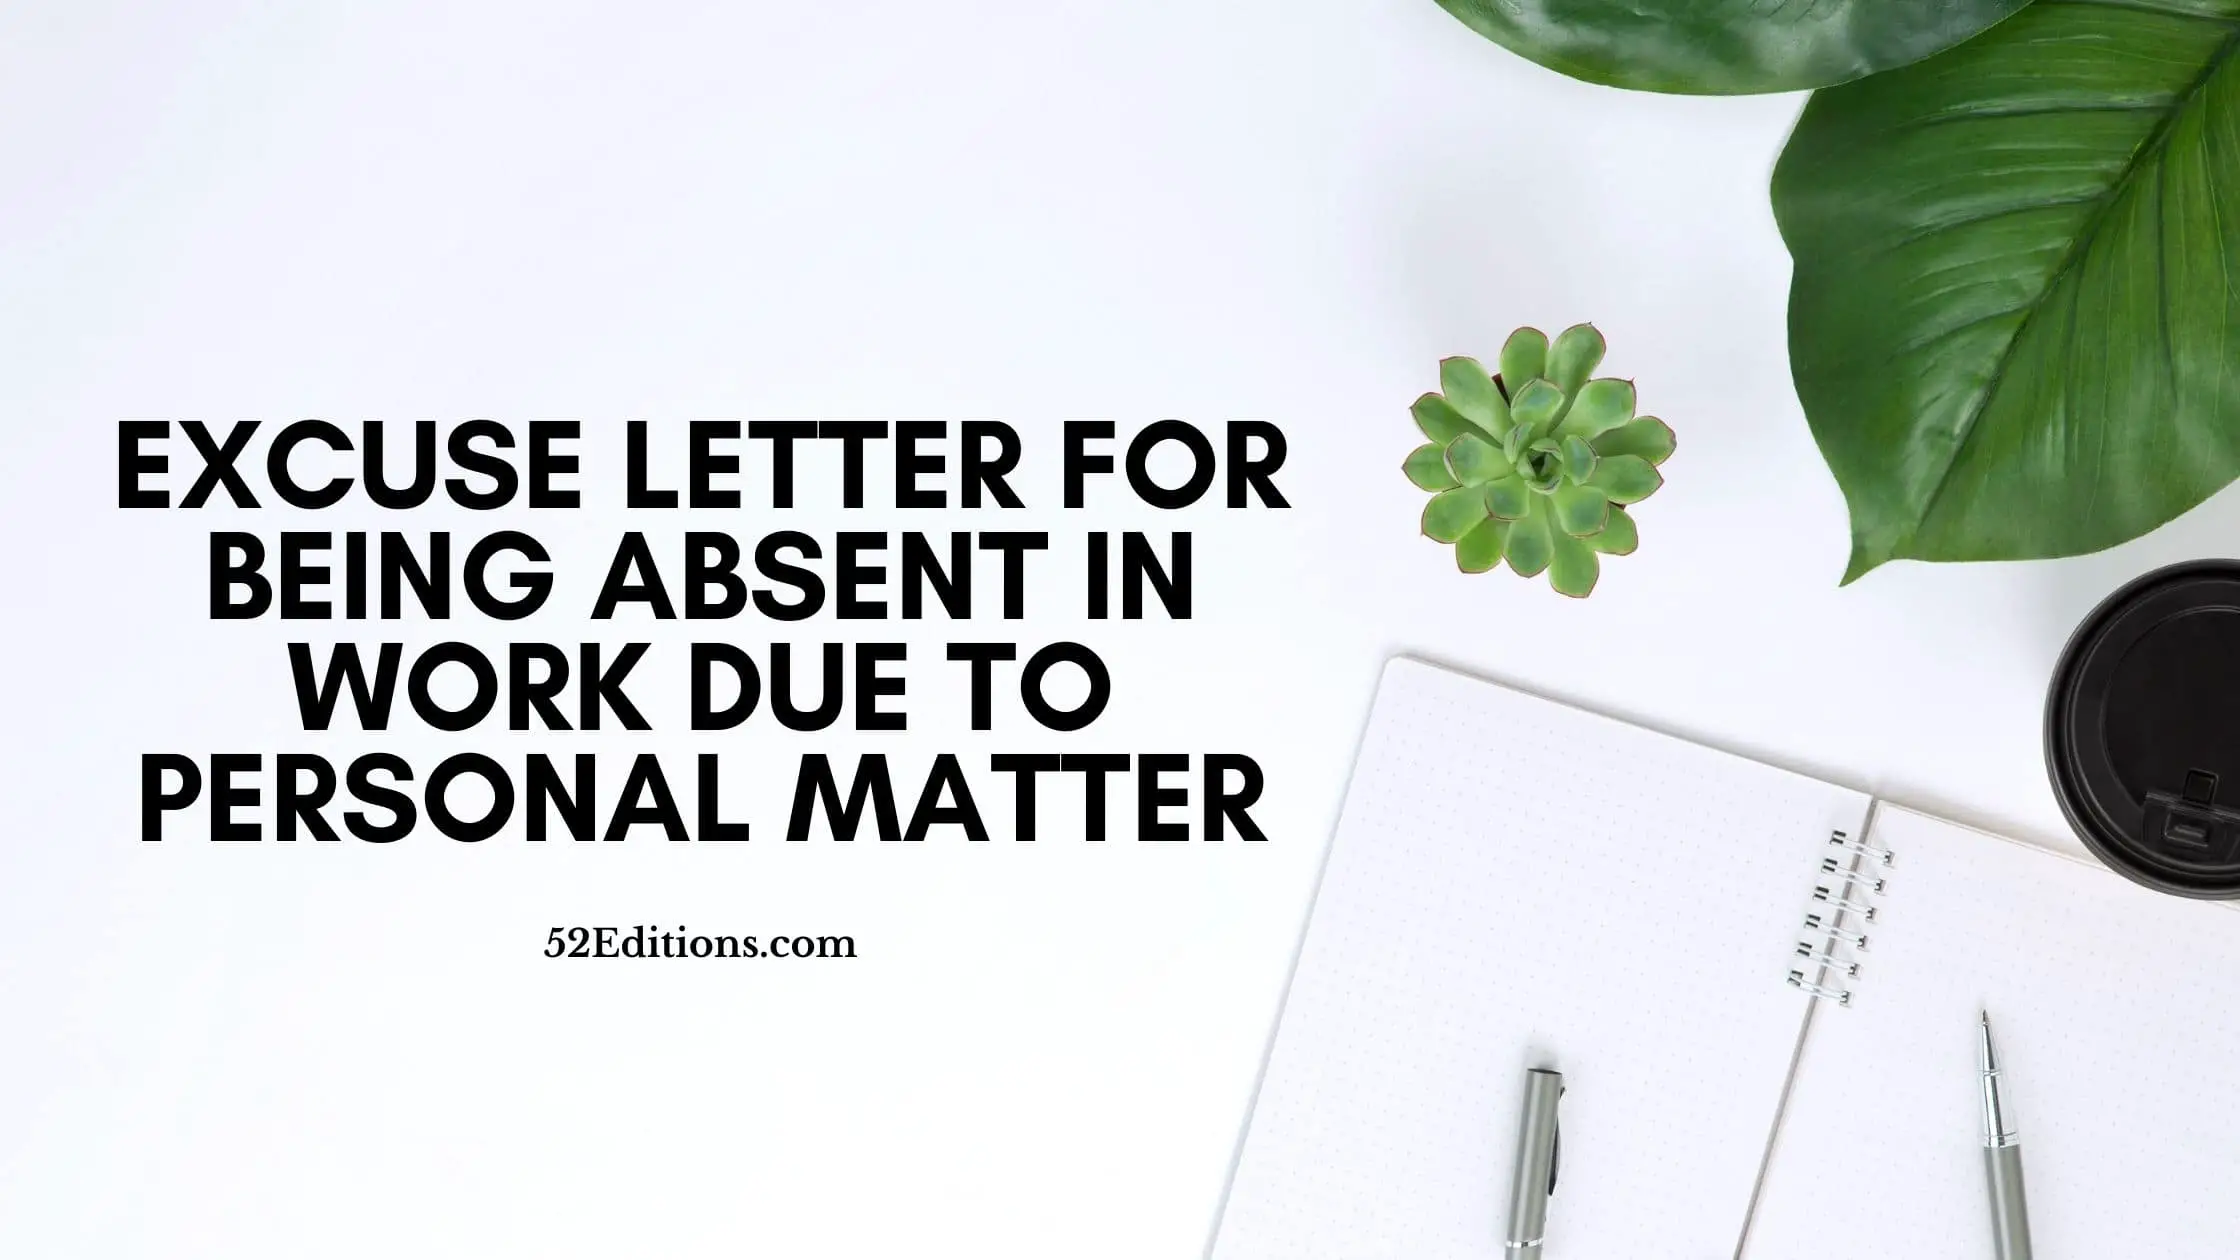 Excuse Letter For Being Absent In Work Due To Personal Matter